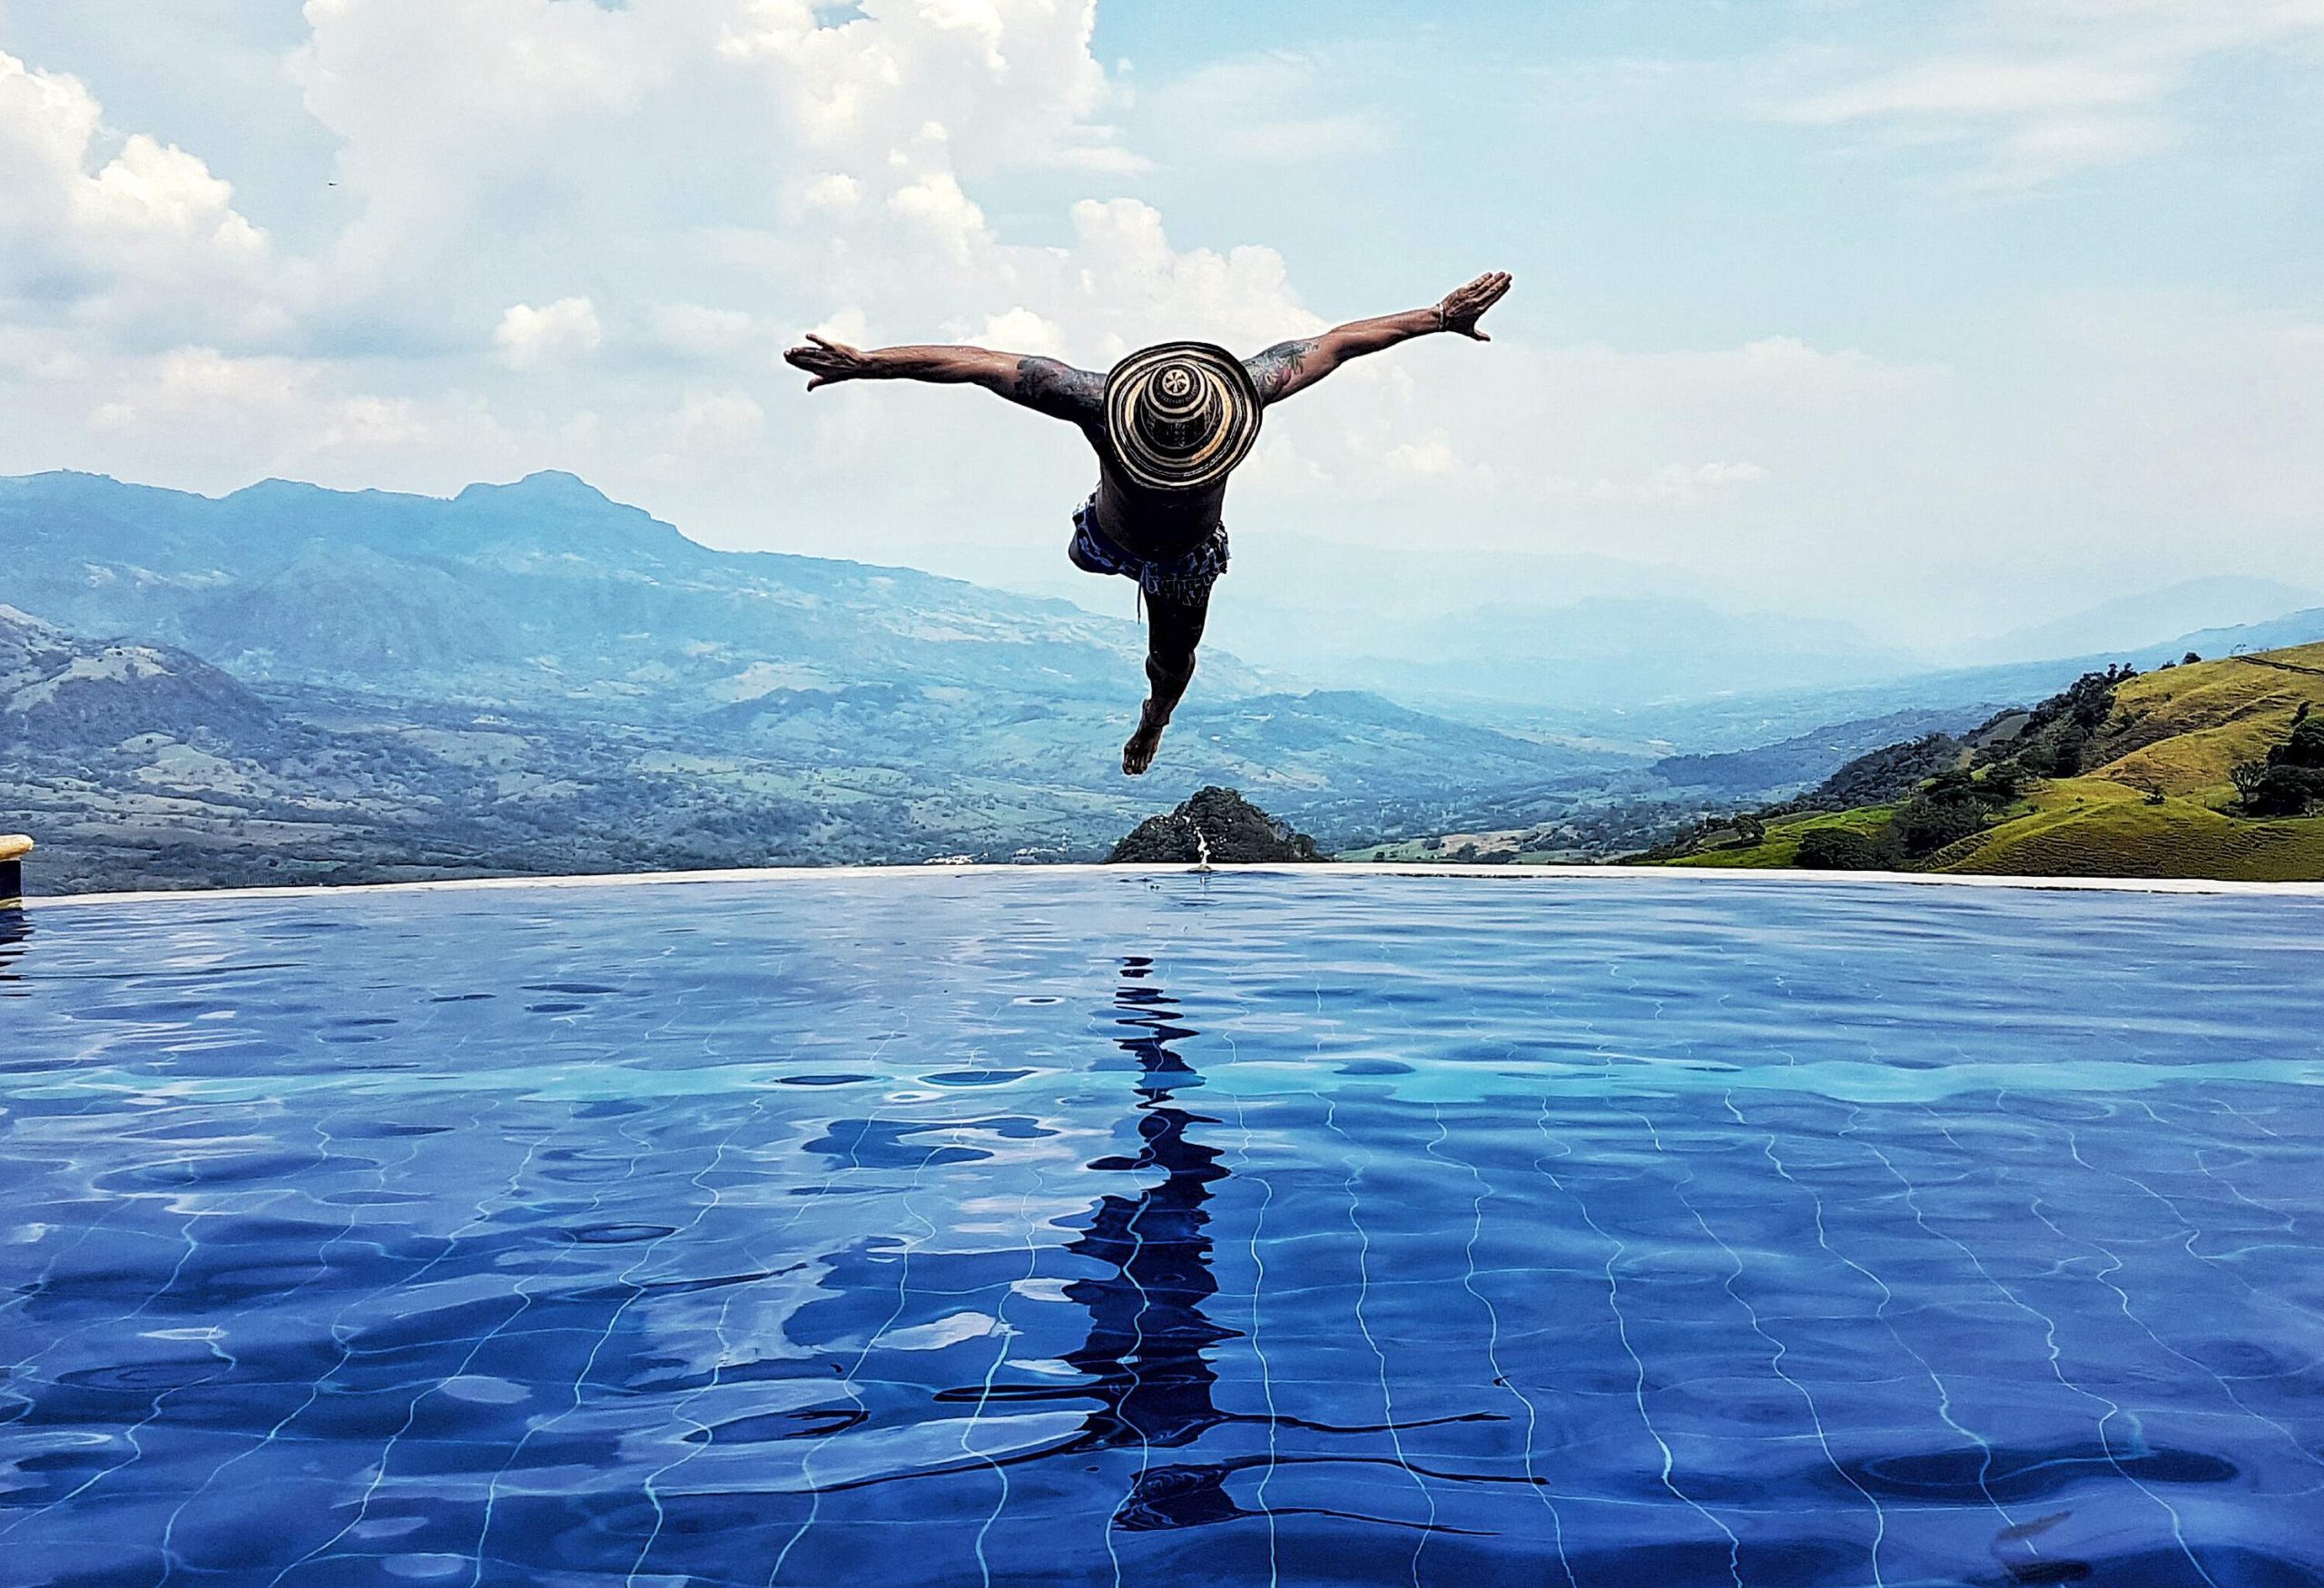 A person in a sun hat dives into an inviting infinity pool with a picturesque mountainous landscape in the background.